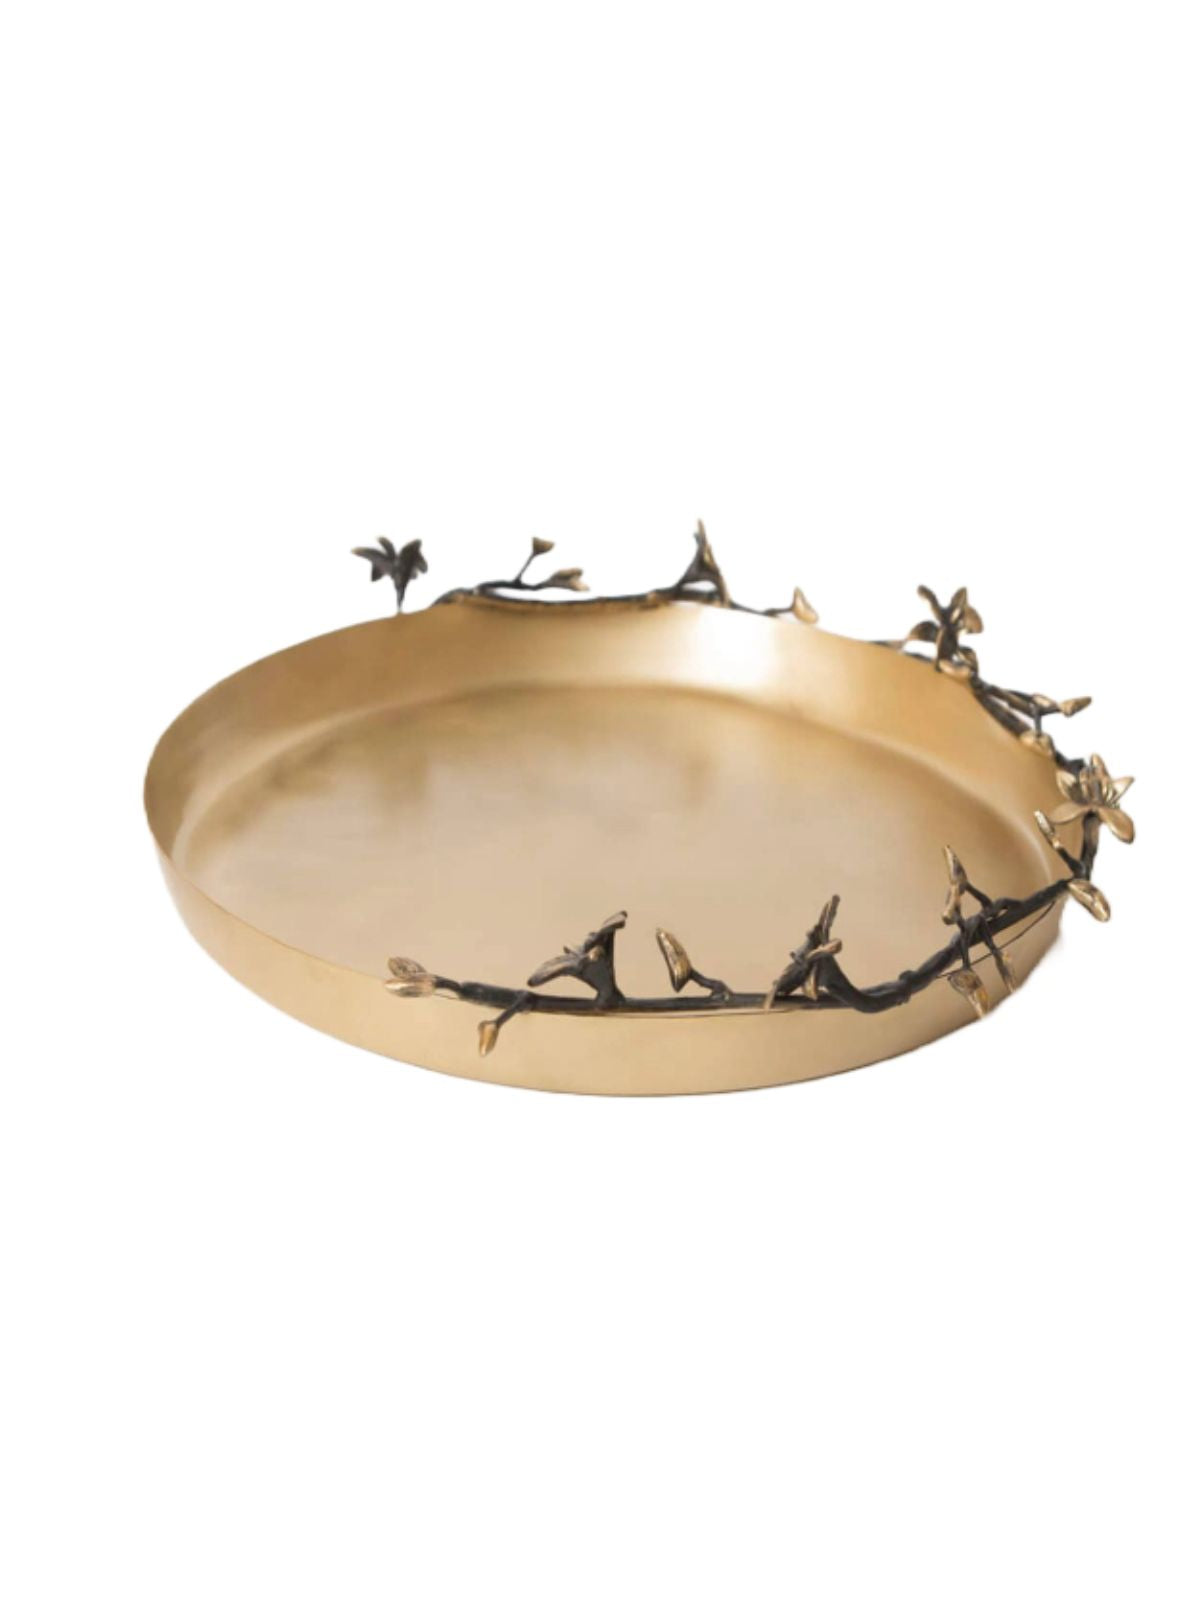 This elegant brushed gold tray with black painted flowers and branches creates an eye catching mix for any center table